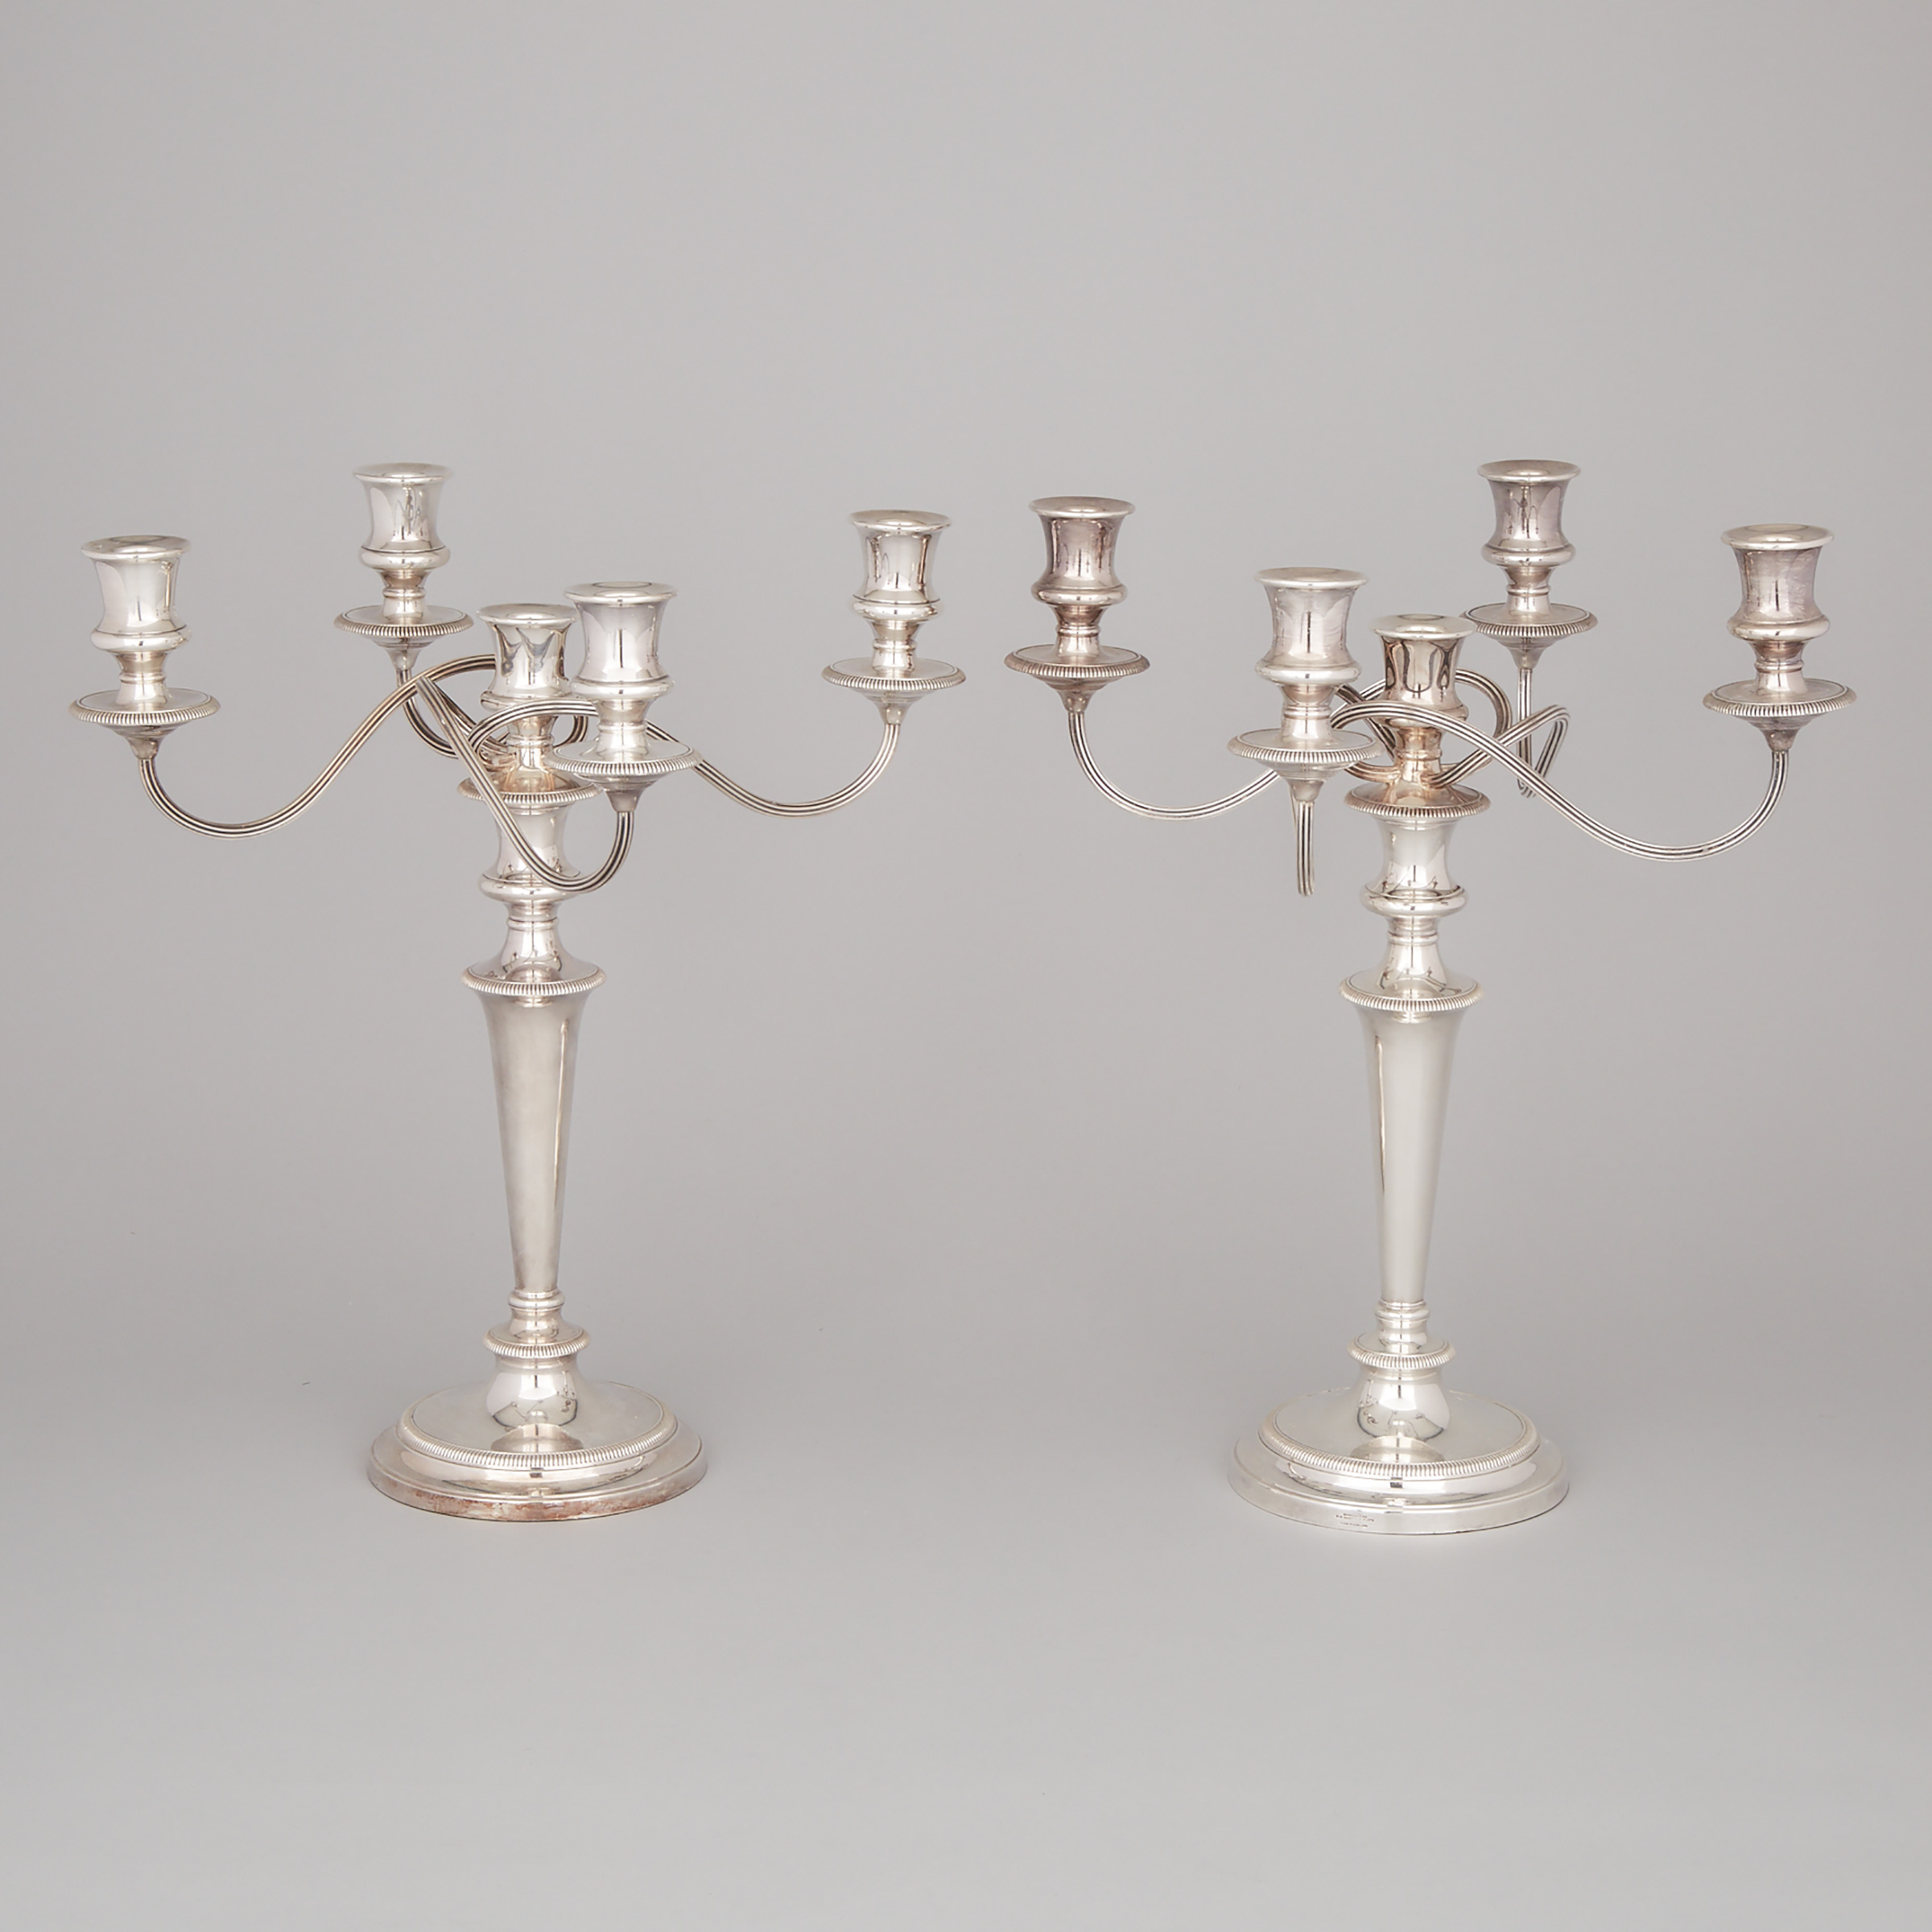 Pair of English Silver Plated Five-Light Candelabra, Barker Bros., 20th century